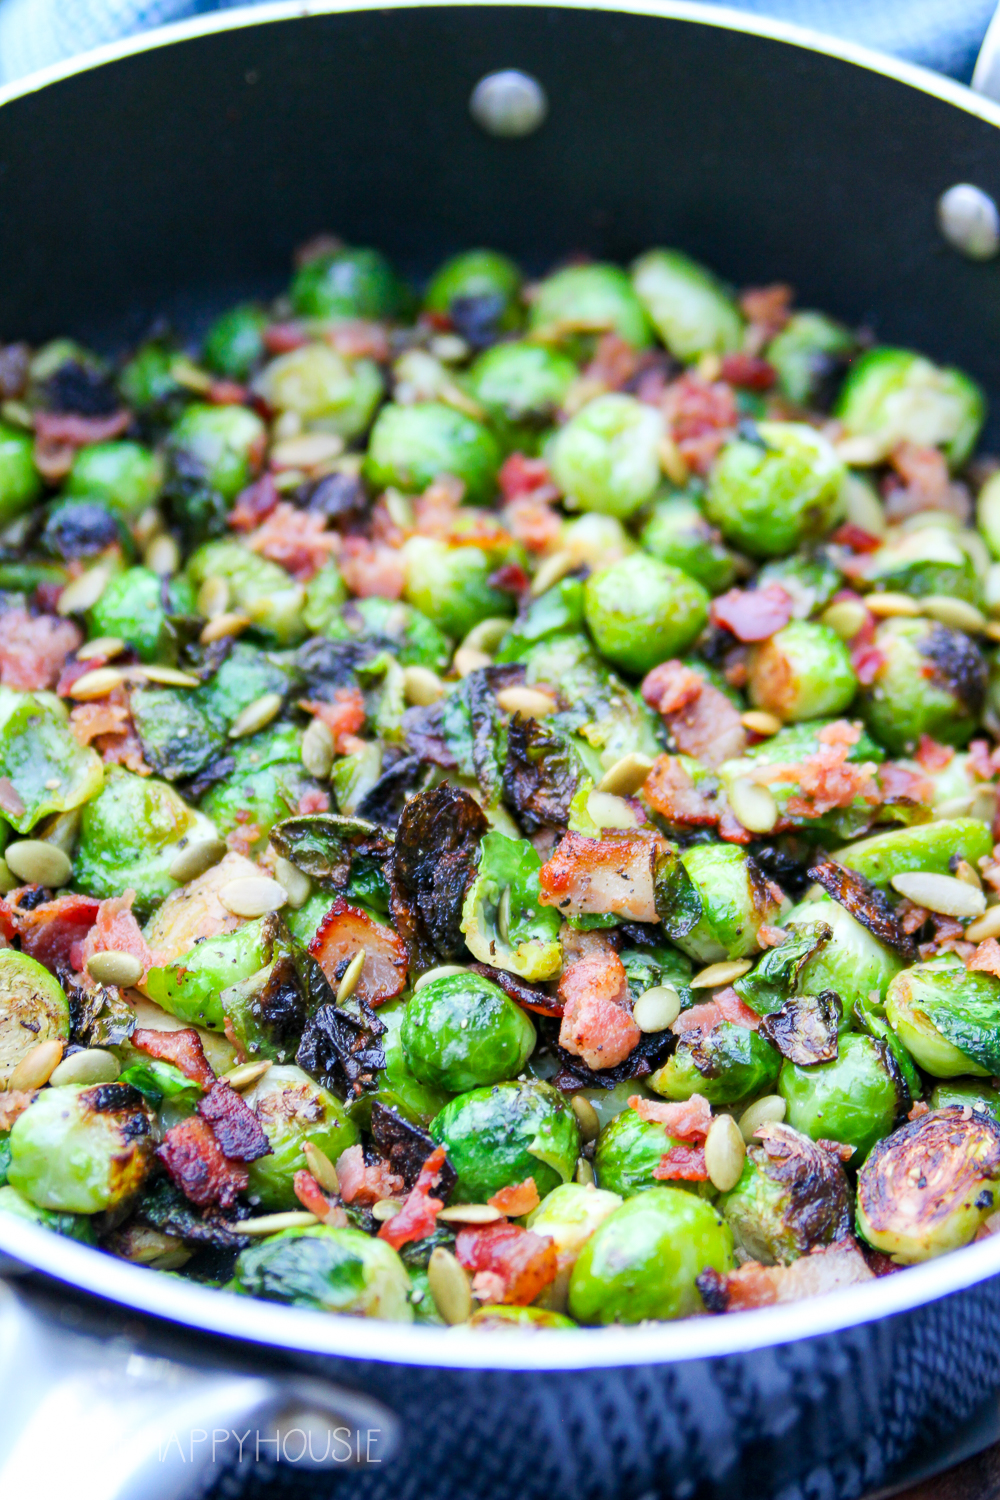 The Brussel sprouts in the frying pan with the bacon.